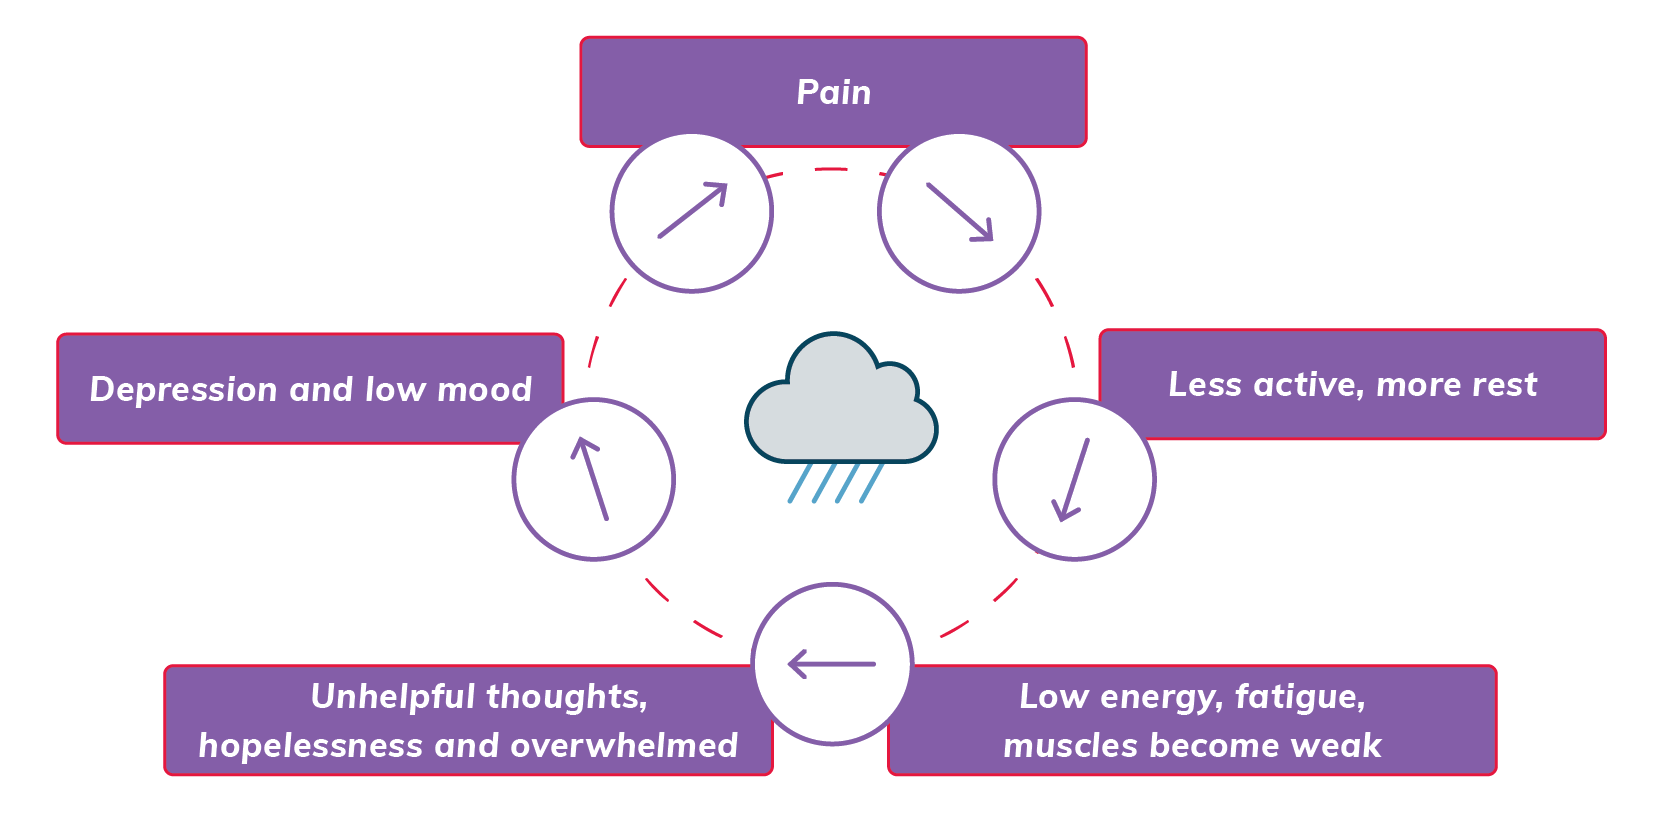 The pain cycle describes the interactive relationship between increased pain, being less active and more rest, low energy, fatigue, weakened muscle, unhelpful thoughts, hopelessness and depression and low mood. 